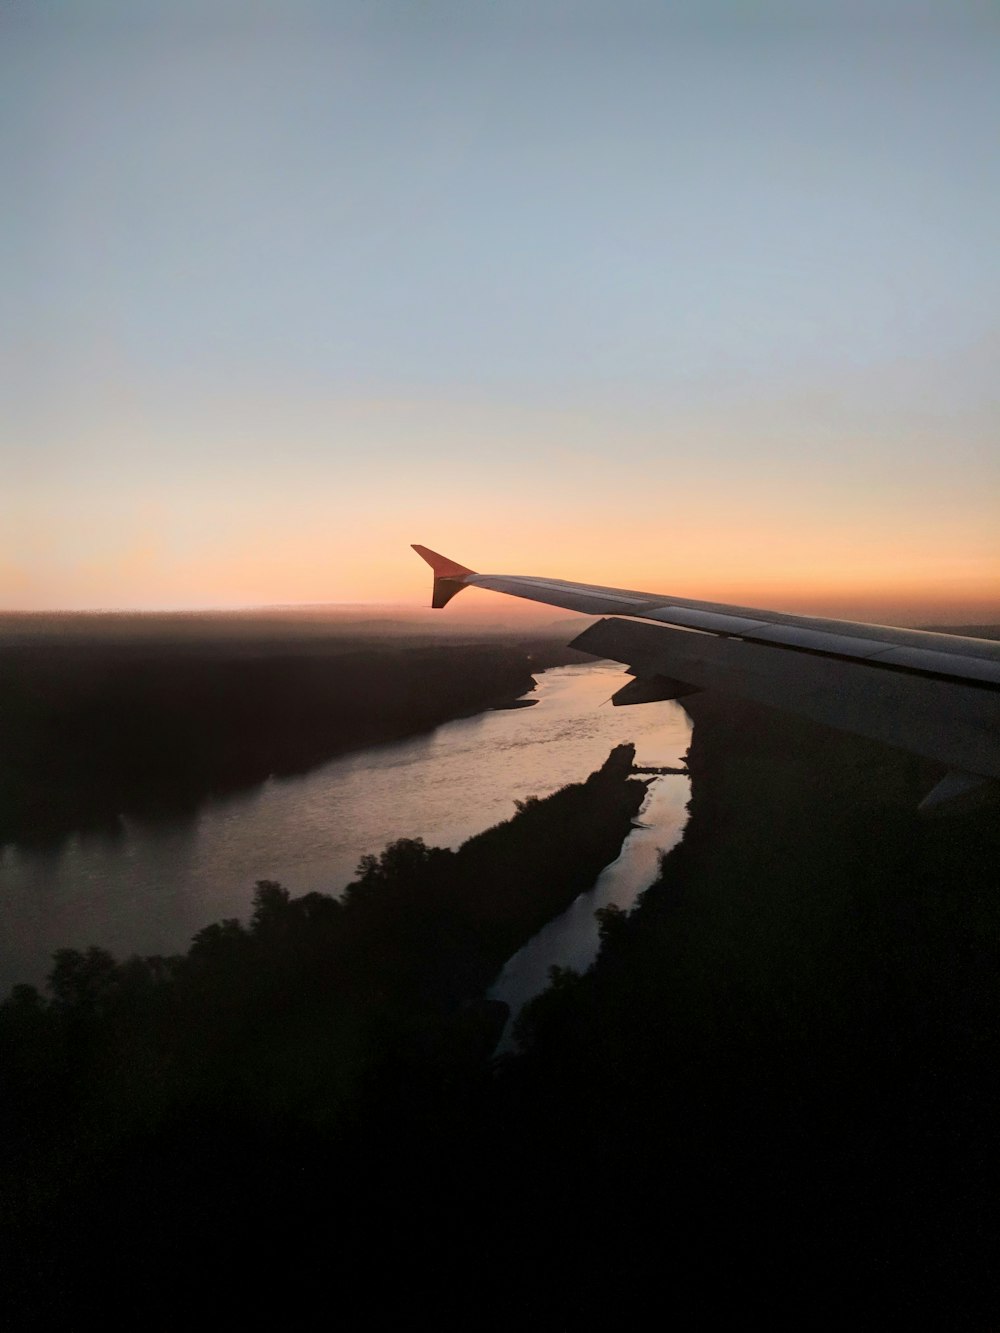 aircraft wingtip overlooking river at night time